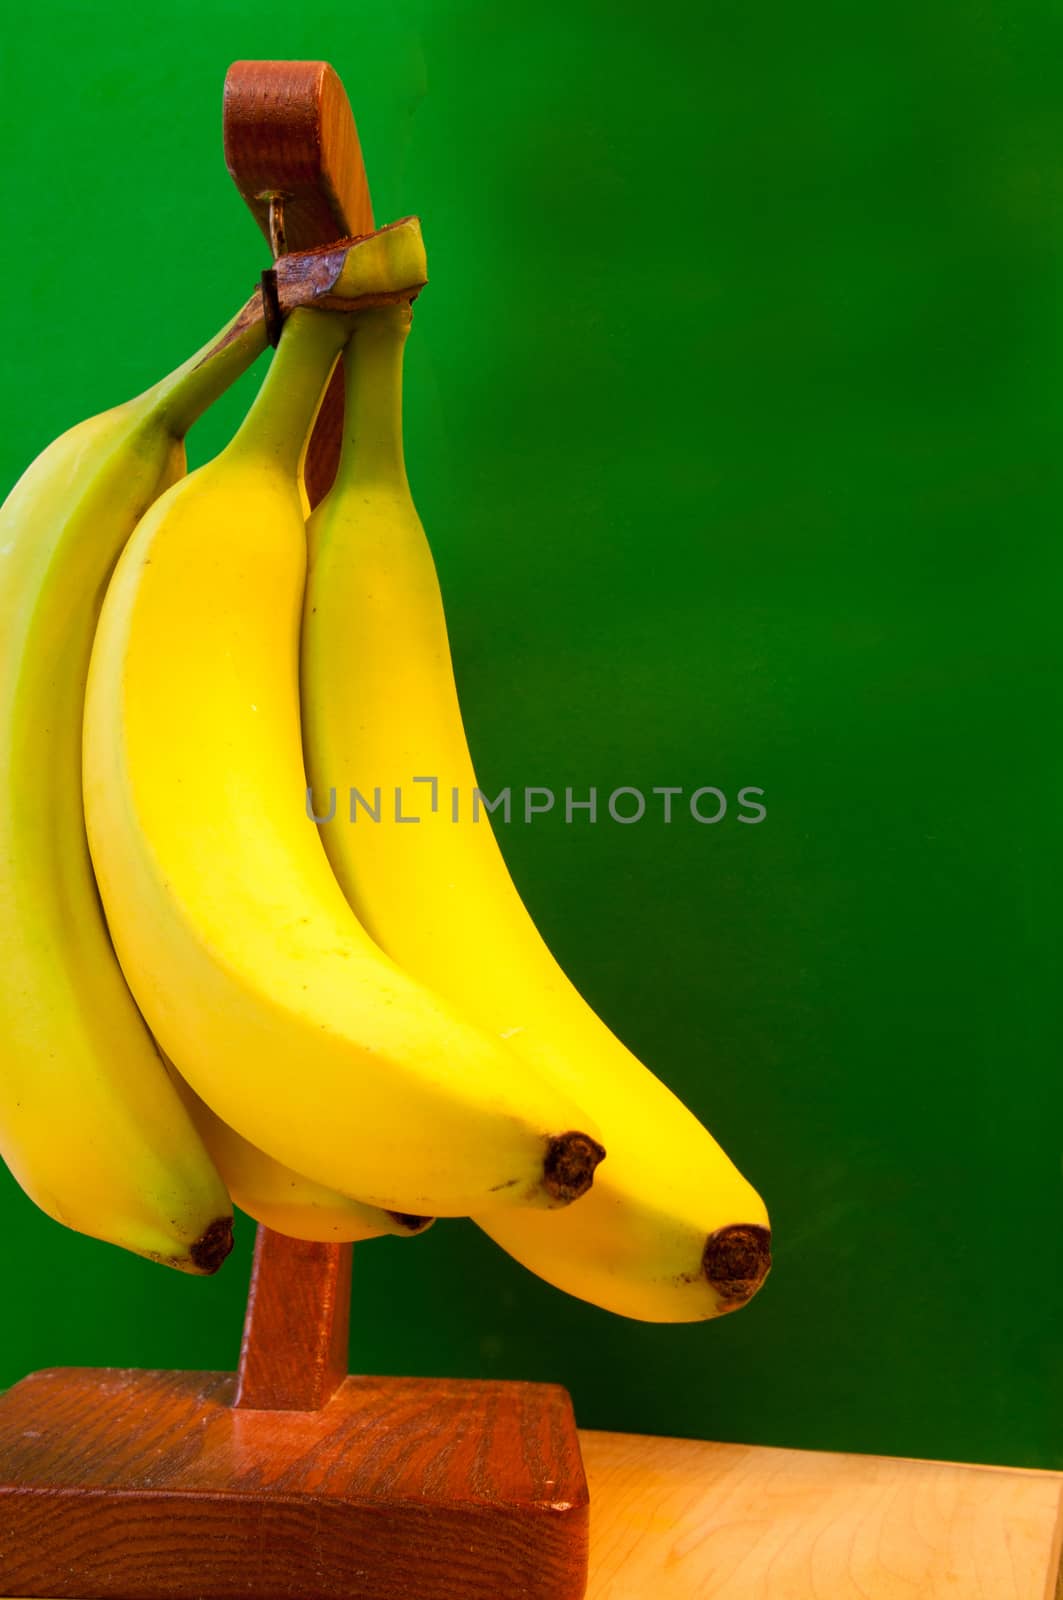 Bananas on a Wooden Stand 